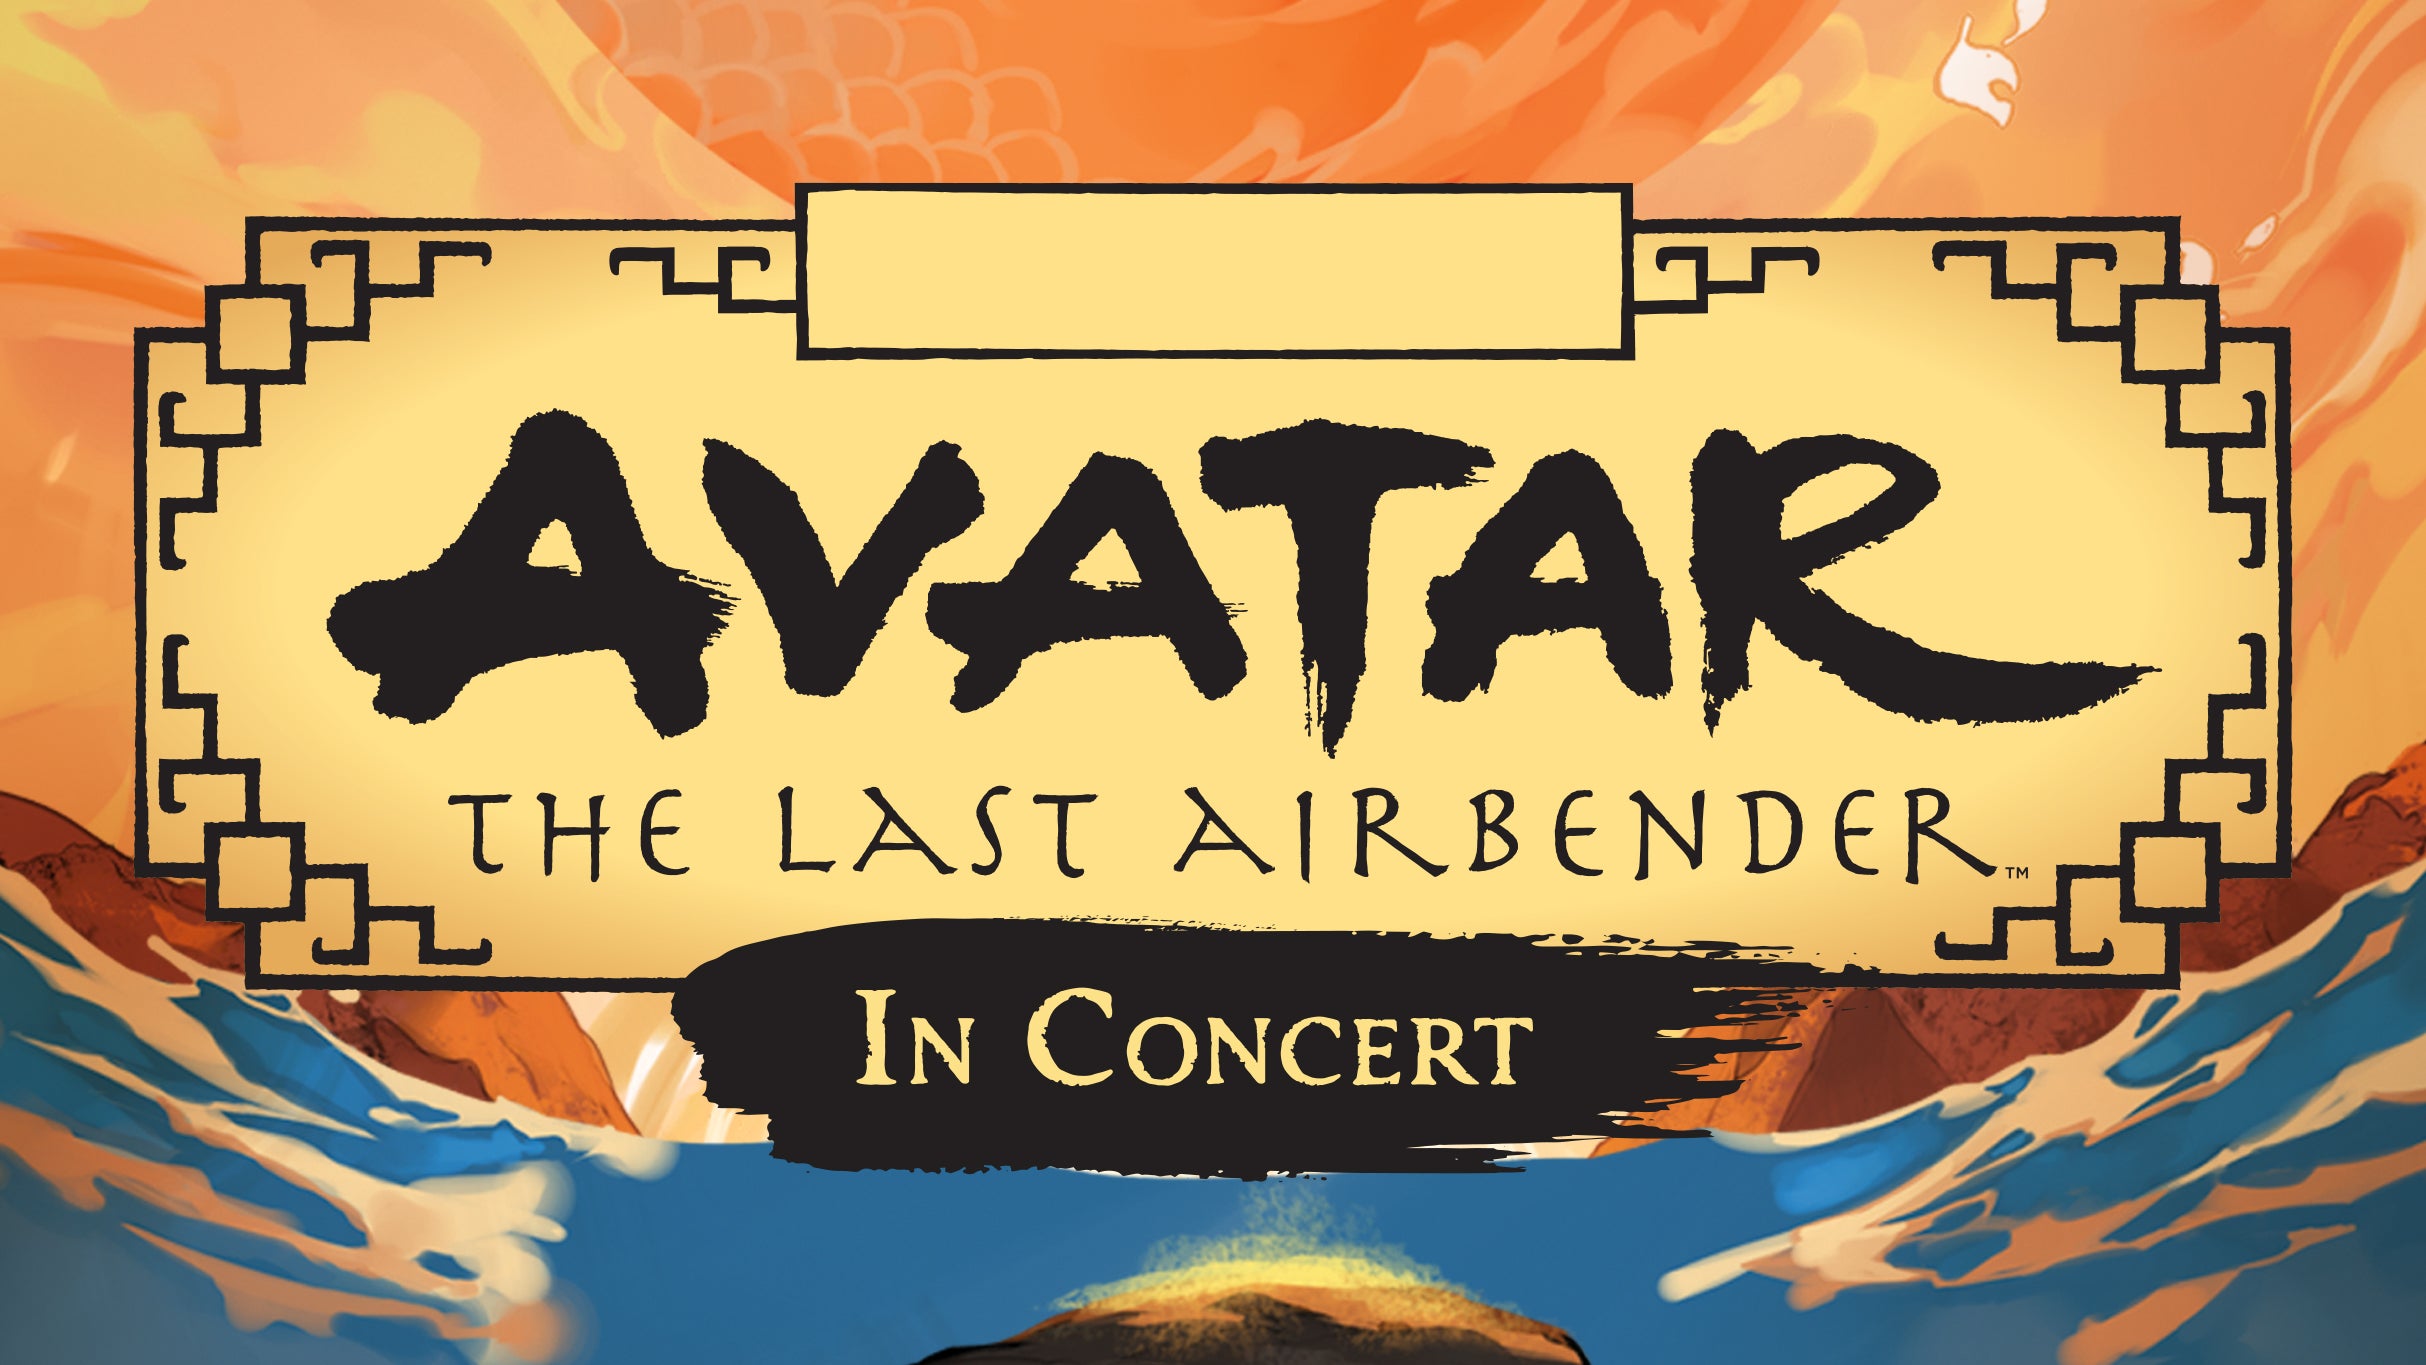 Avatar - The Last Airbender presale code for genuine tickets in Chicago